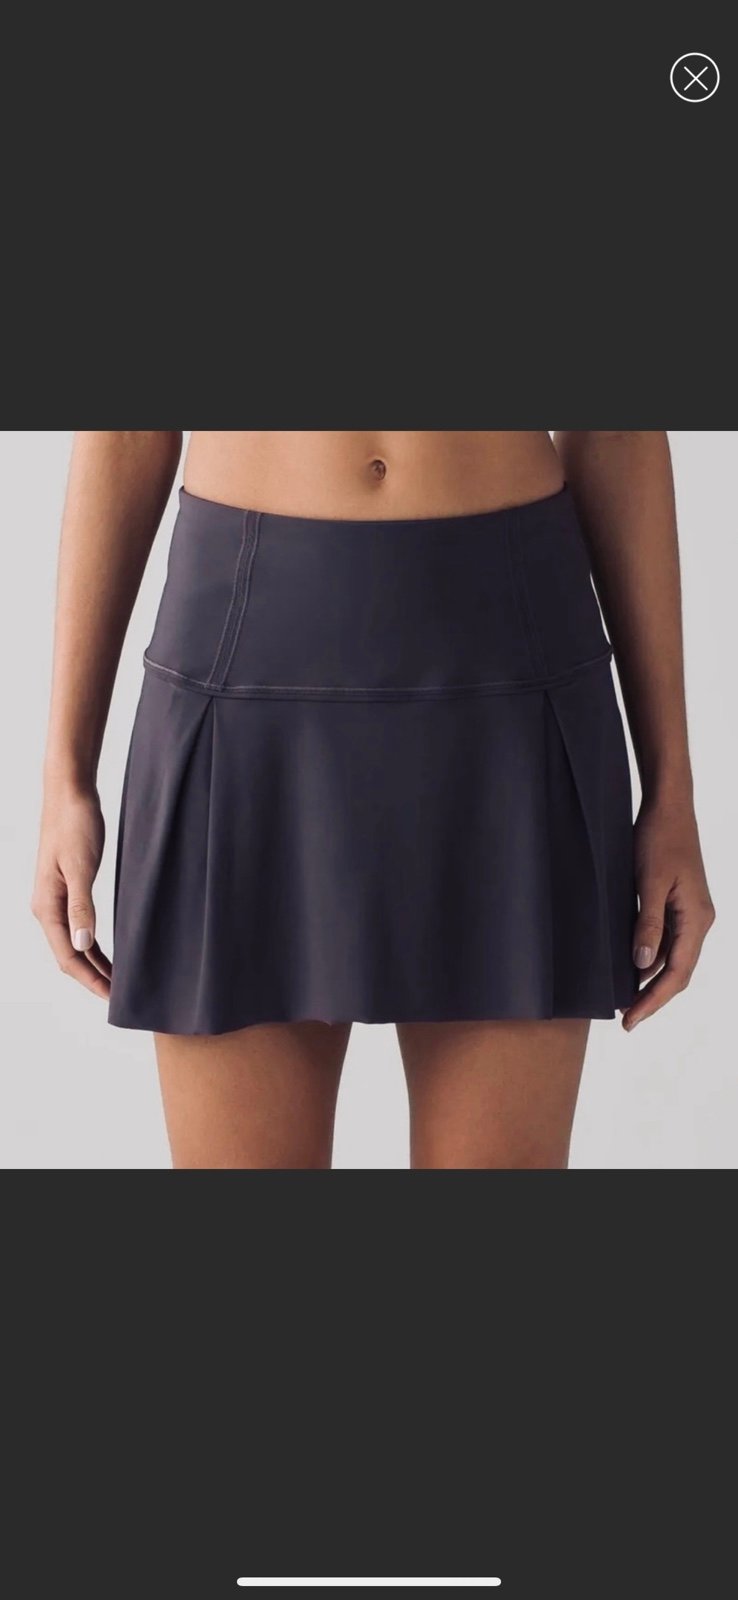 Perfect Lululemon Lost In Pace Skirt Size 8 Black JVG6Y